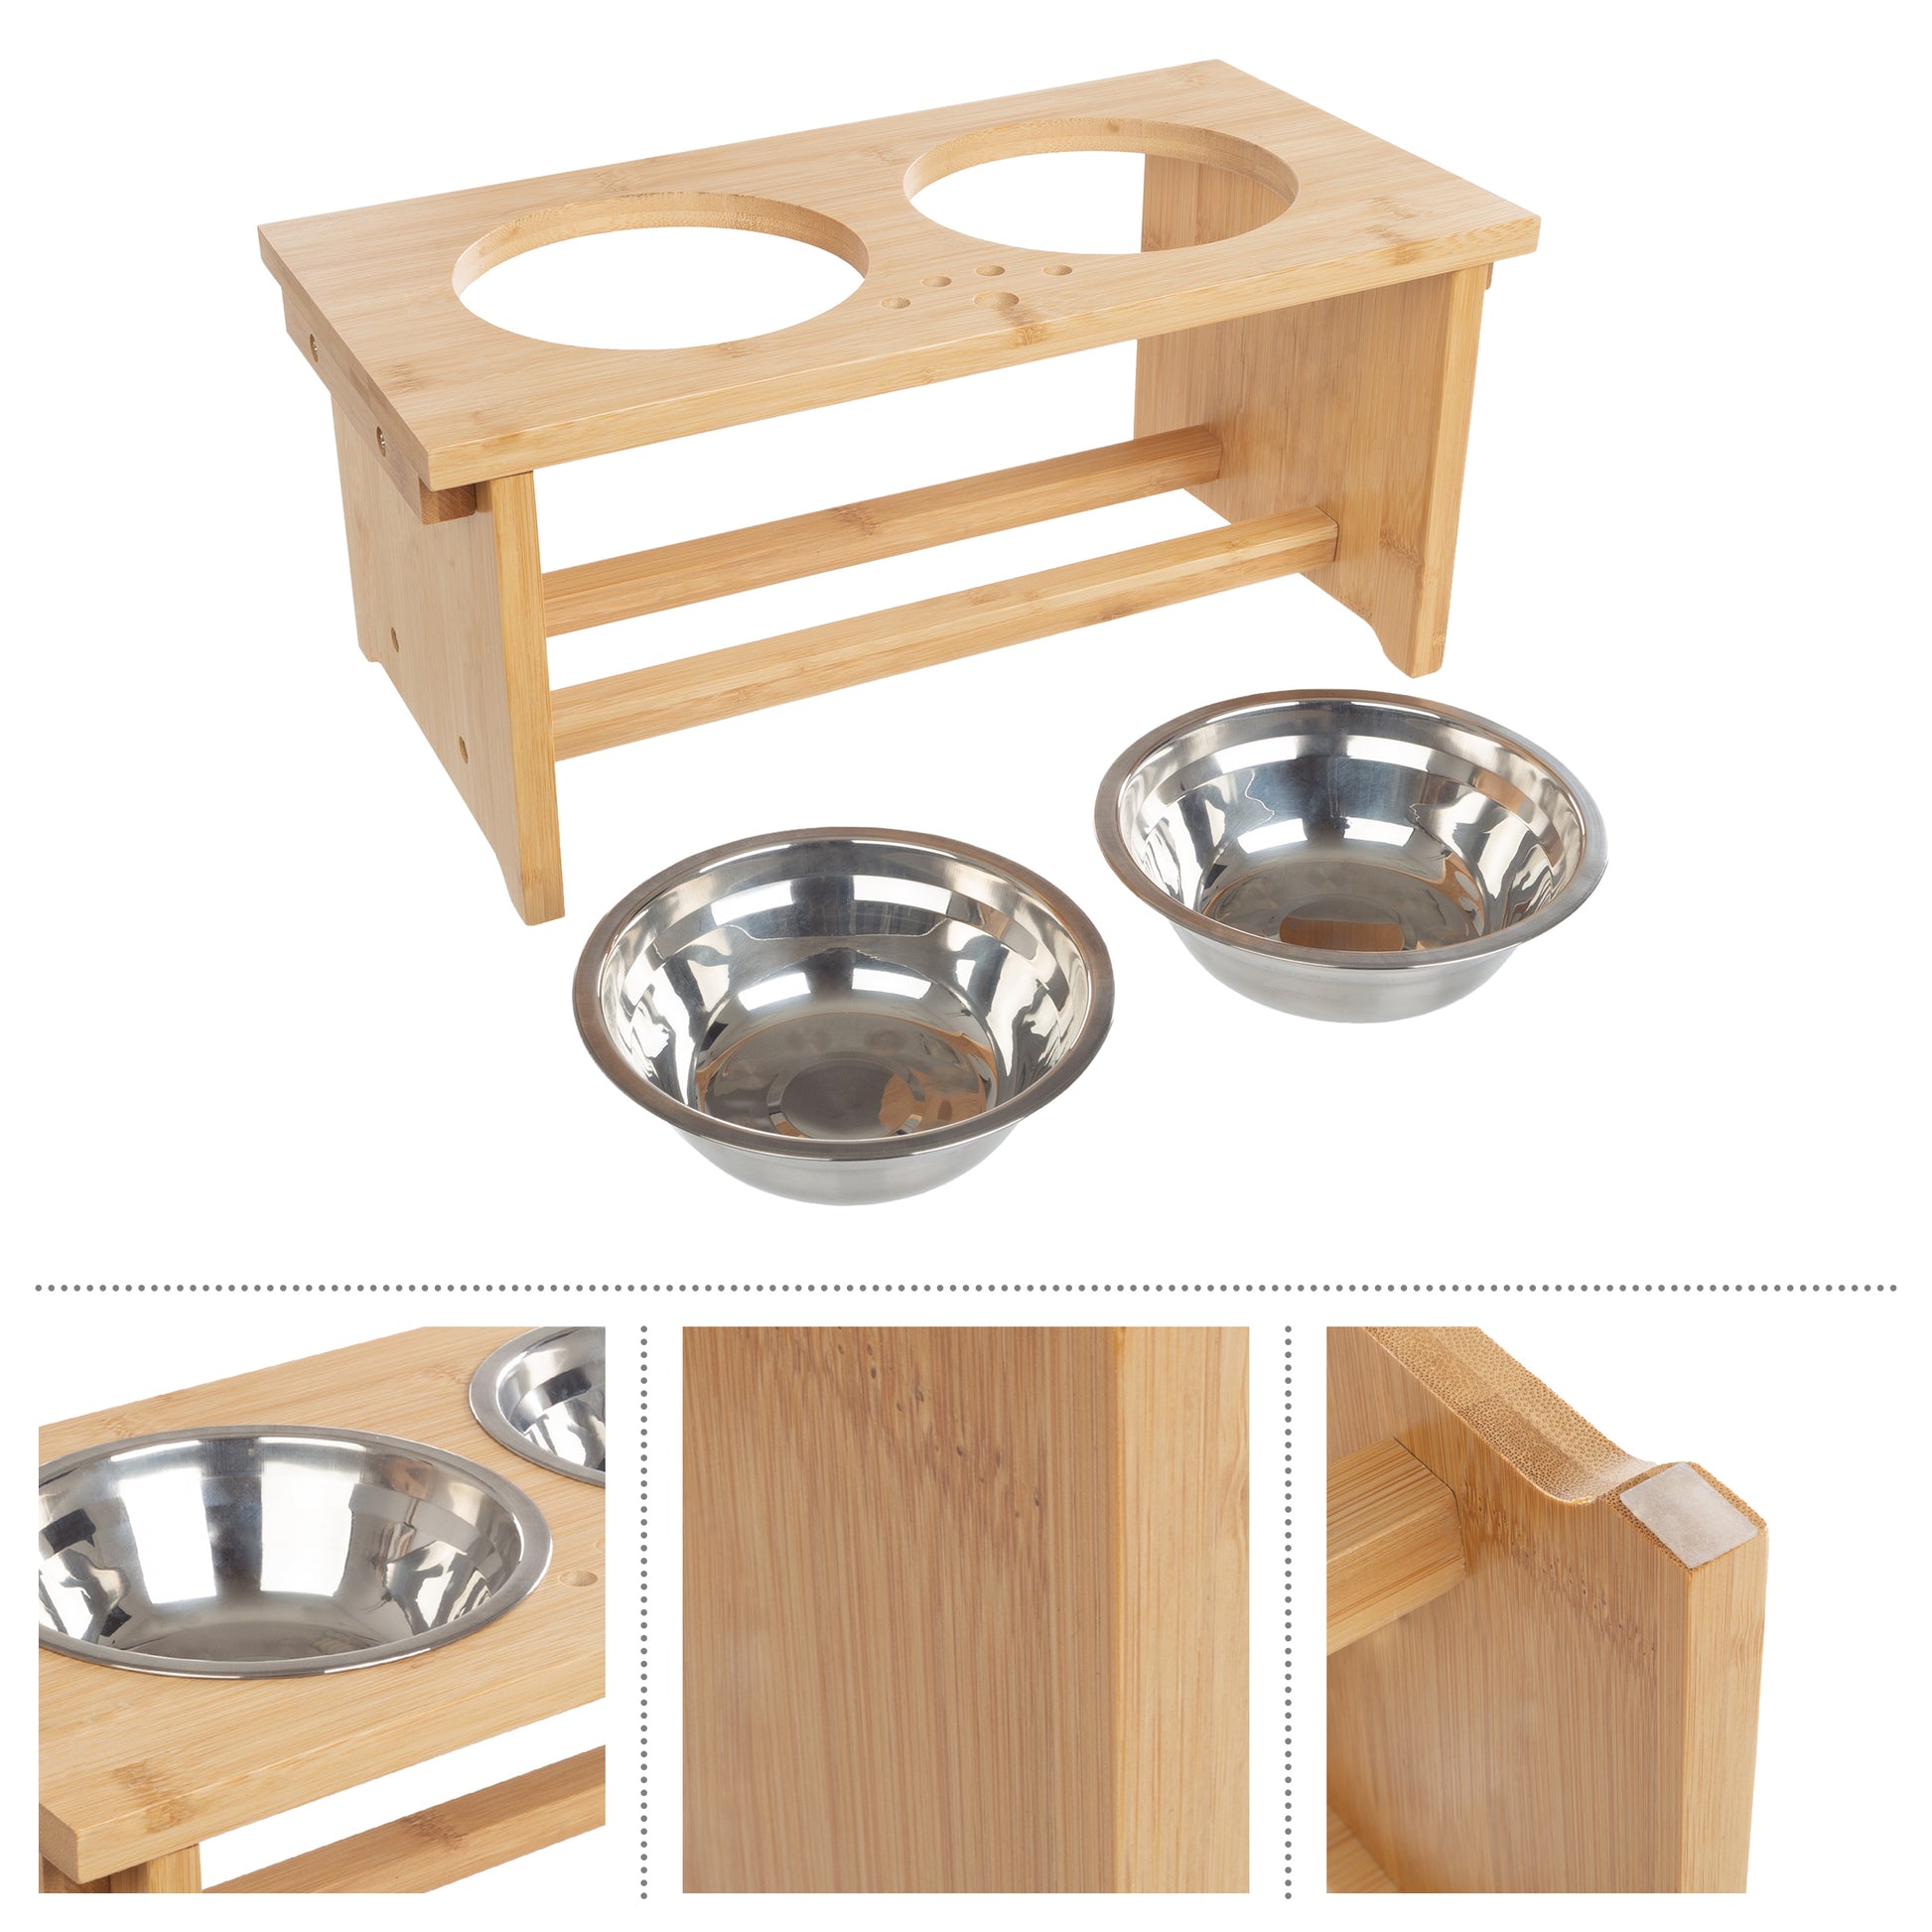 Elevated Bamboo Dog Bowl Stand – Should We Go?